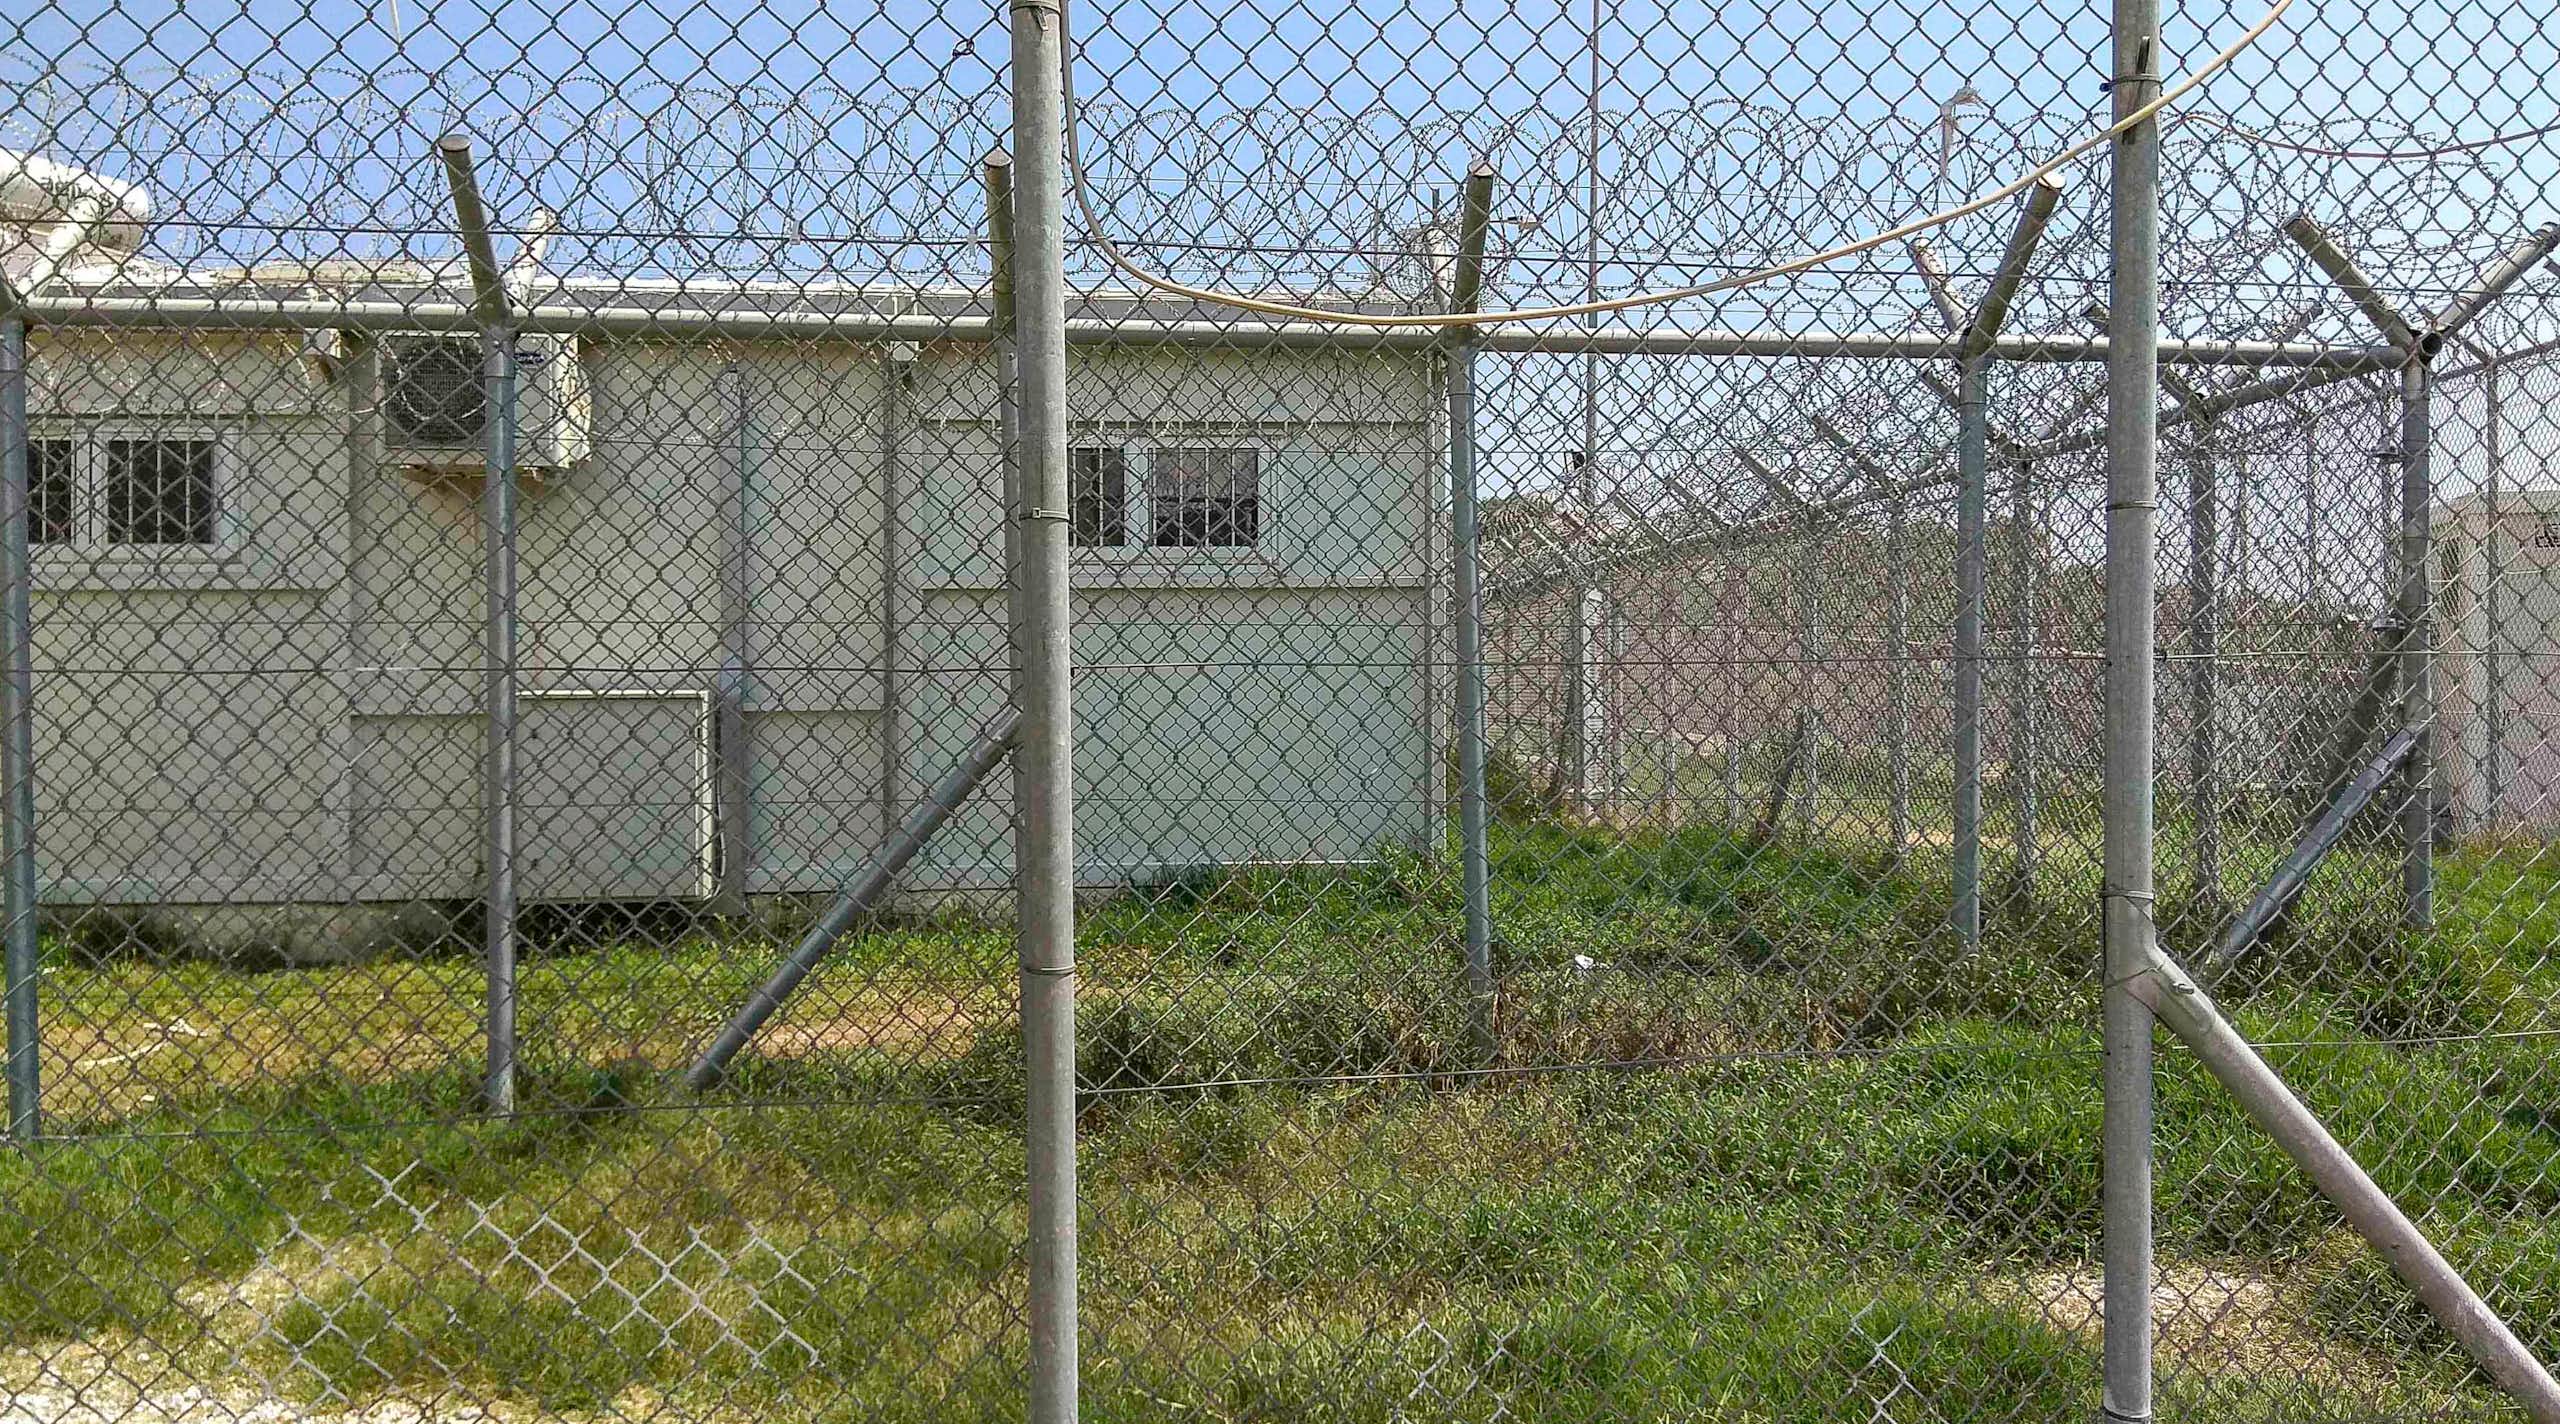 A hut is seen behind a wire fence.